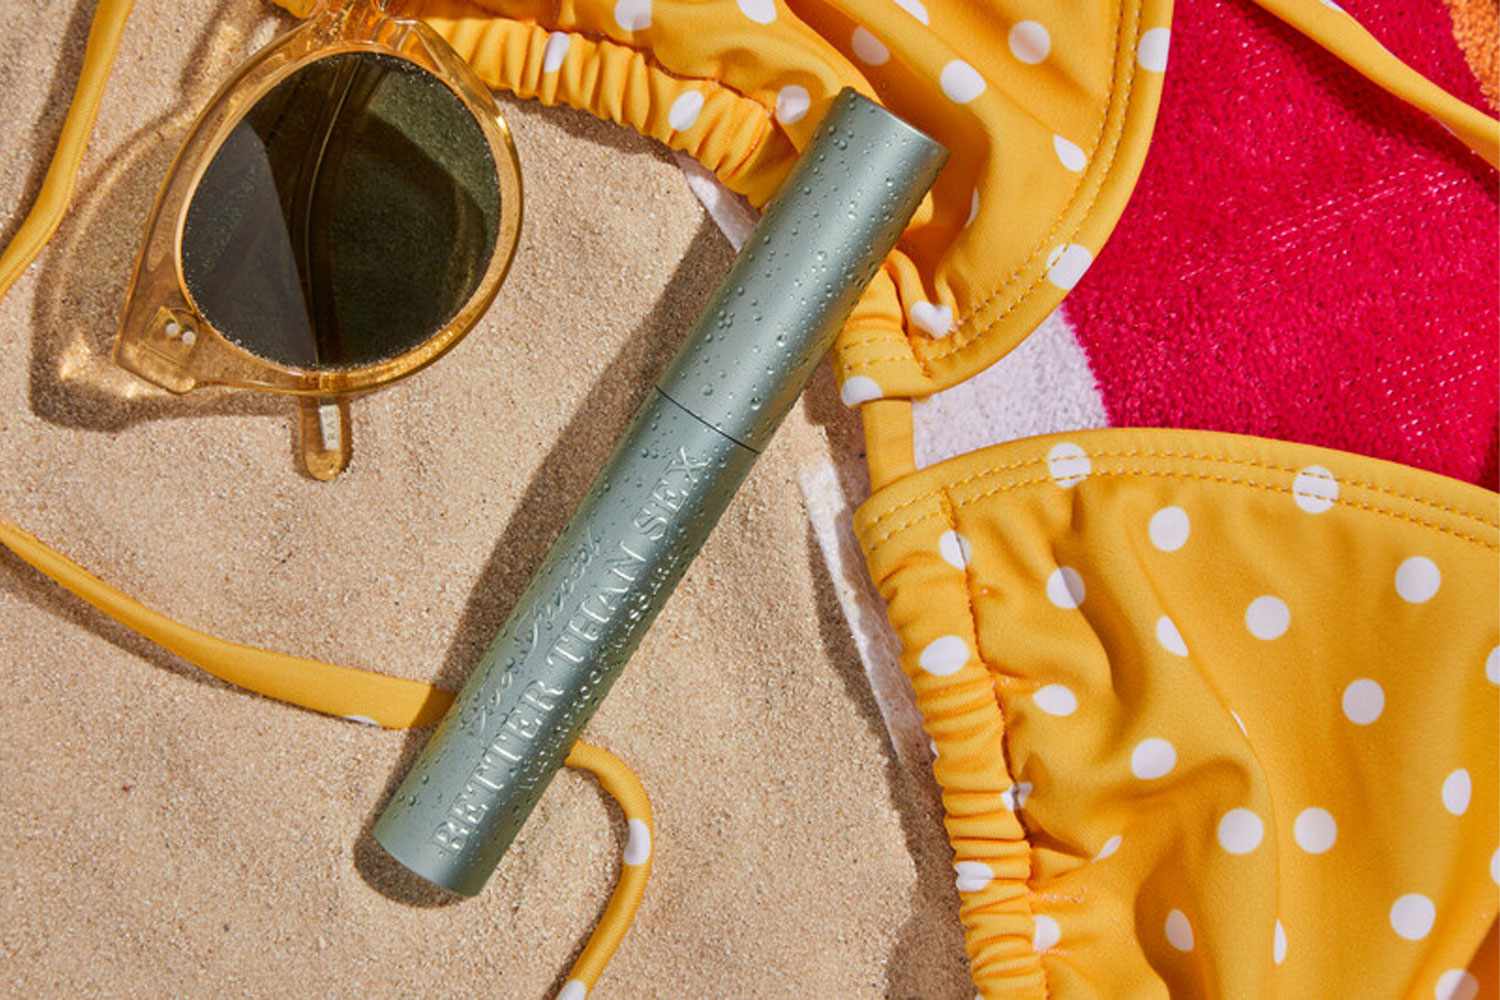 Too Faced Better Than Sex Waterproof Mascara next to a bikini top and sunglasses on sand